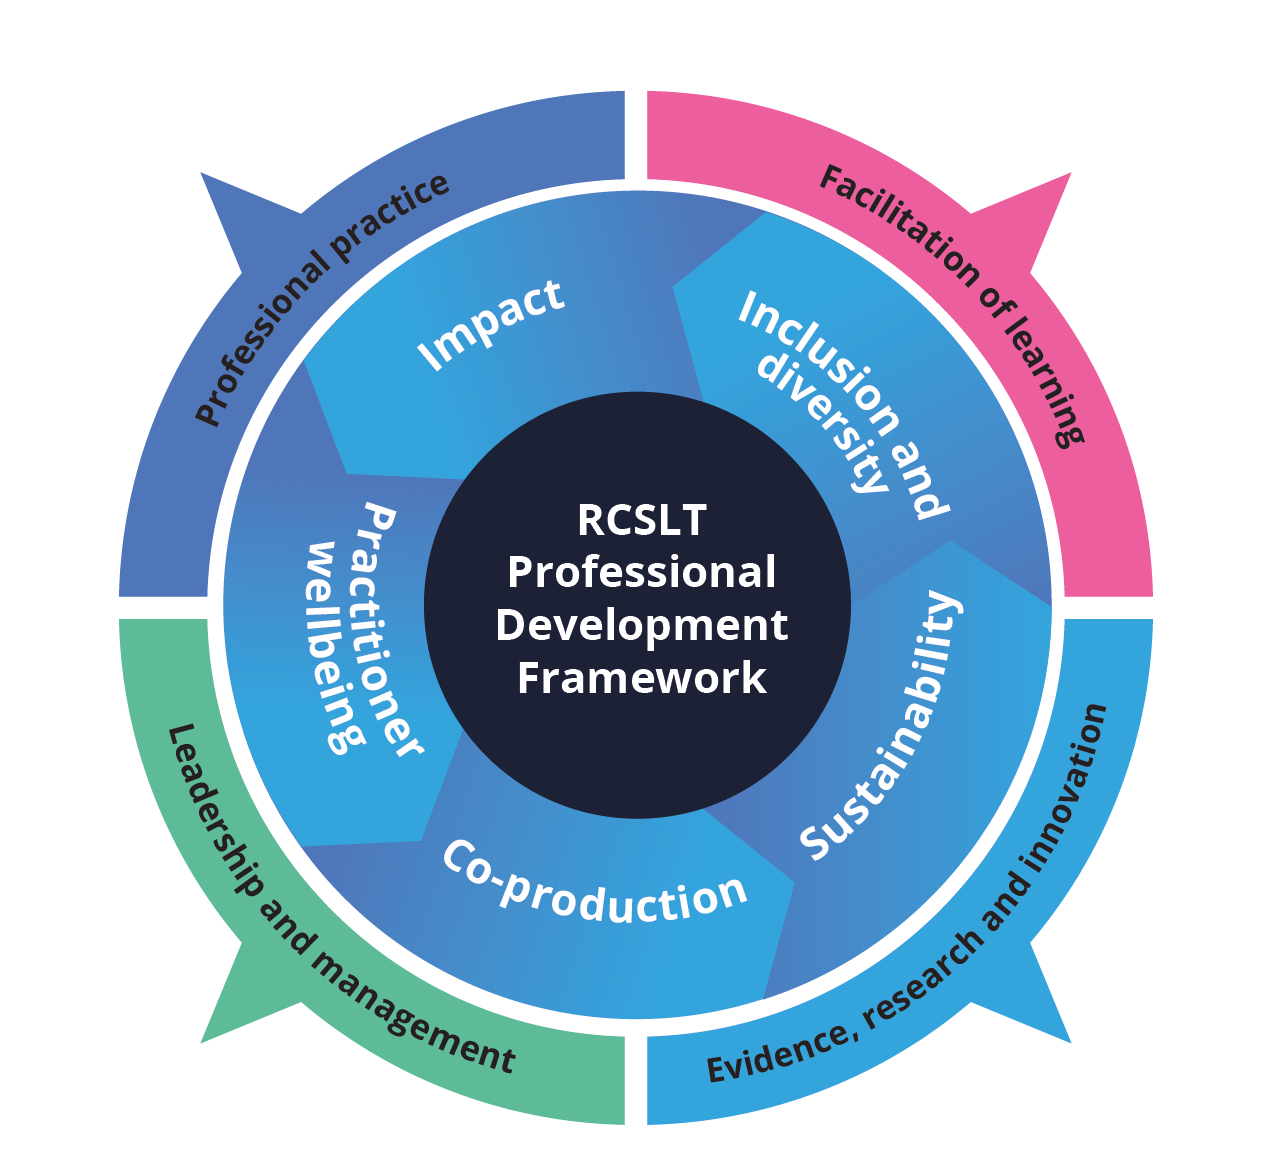 The RCSLT Professional Development Framework supports all practitioners and managers to identify existing knowledge and skills and areas for future learning and development. It articulates the five core components (practitioner wellbeing, impact, inclusion and diversity, sustainability, co-production) and four domains of practice (professional practice; facilitation of learning; evidence, research and innovation; and leadership and management) for learning and professional development.